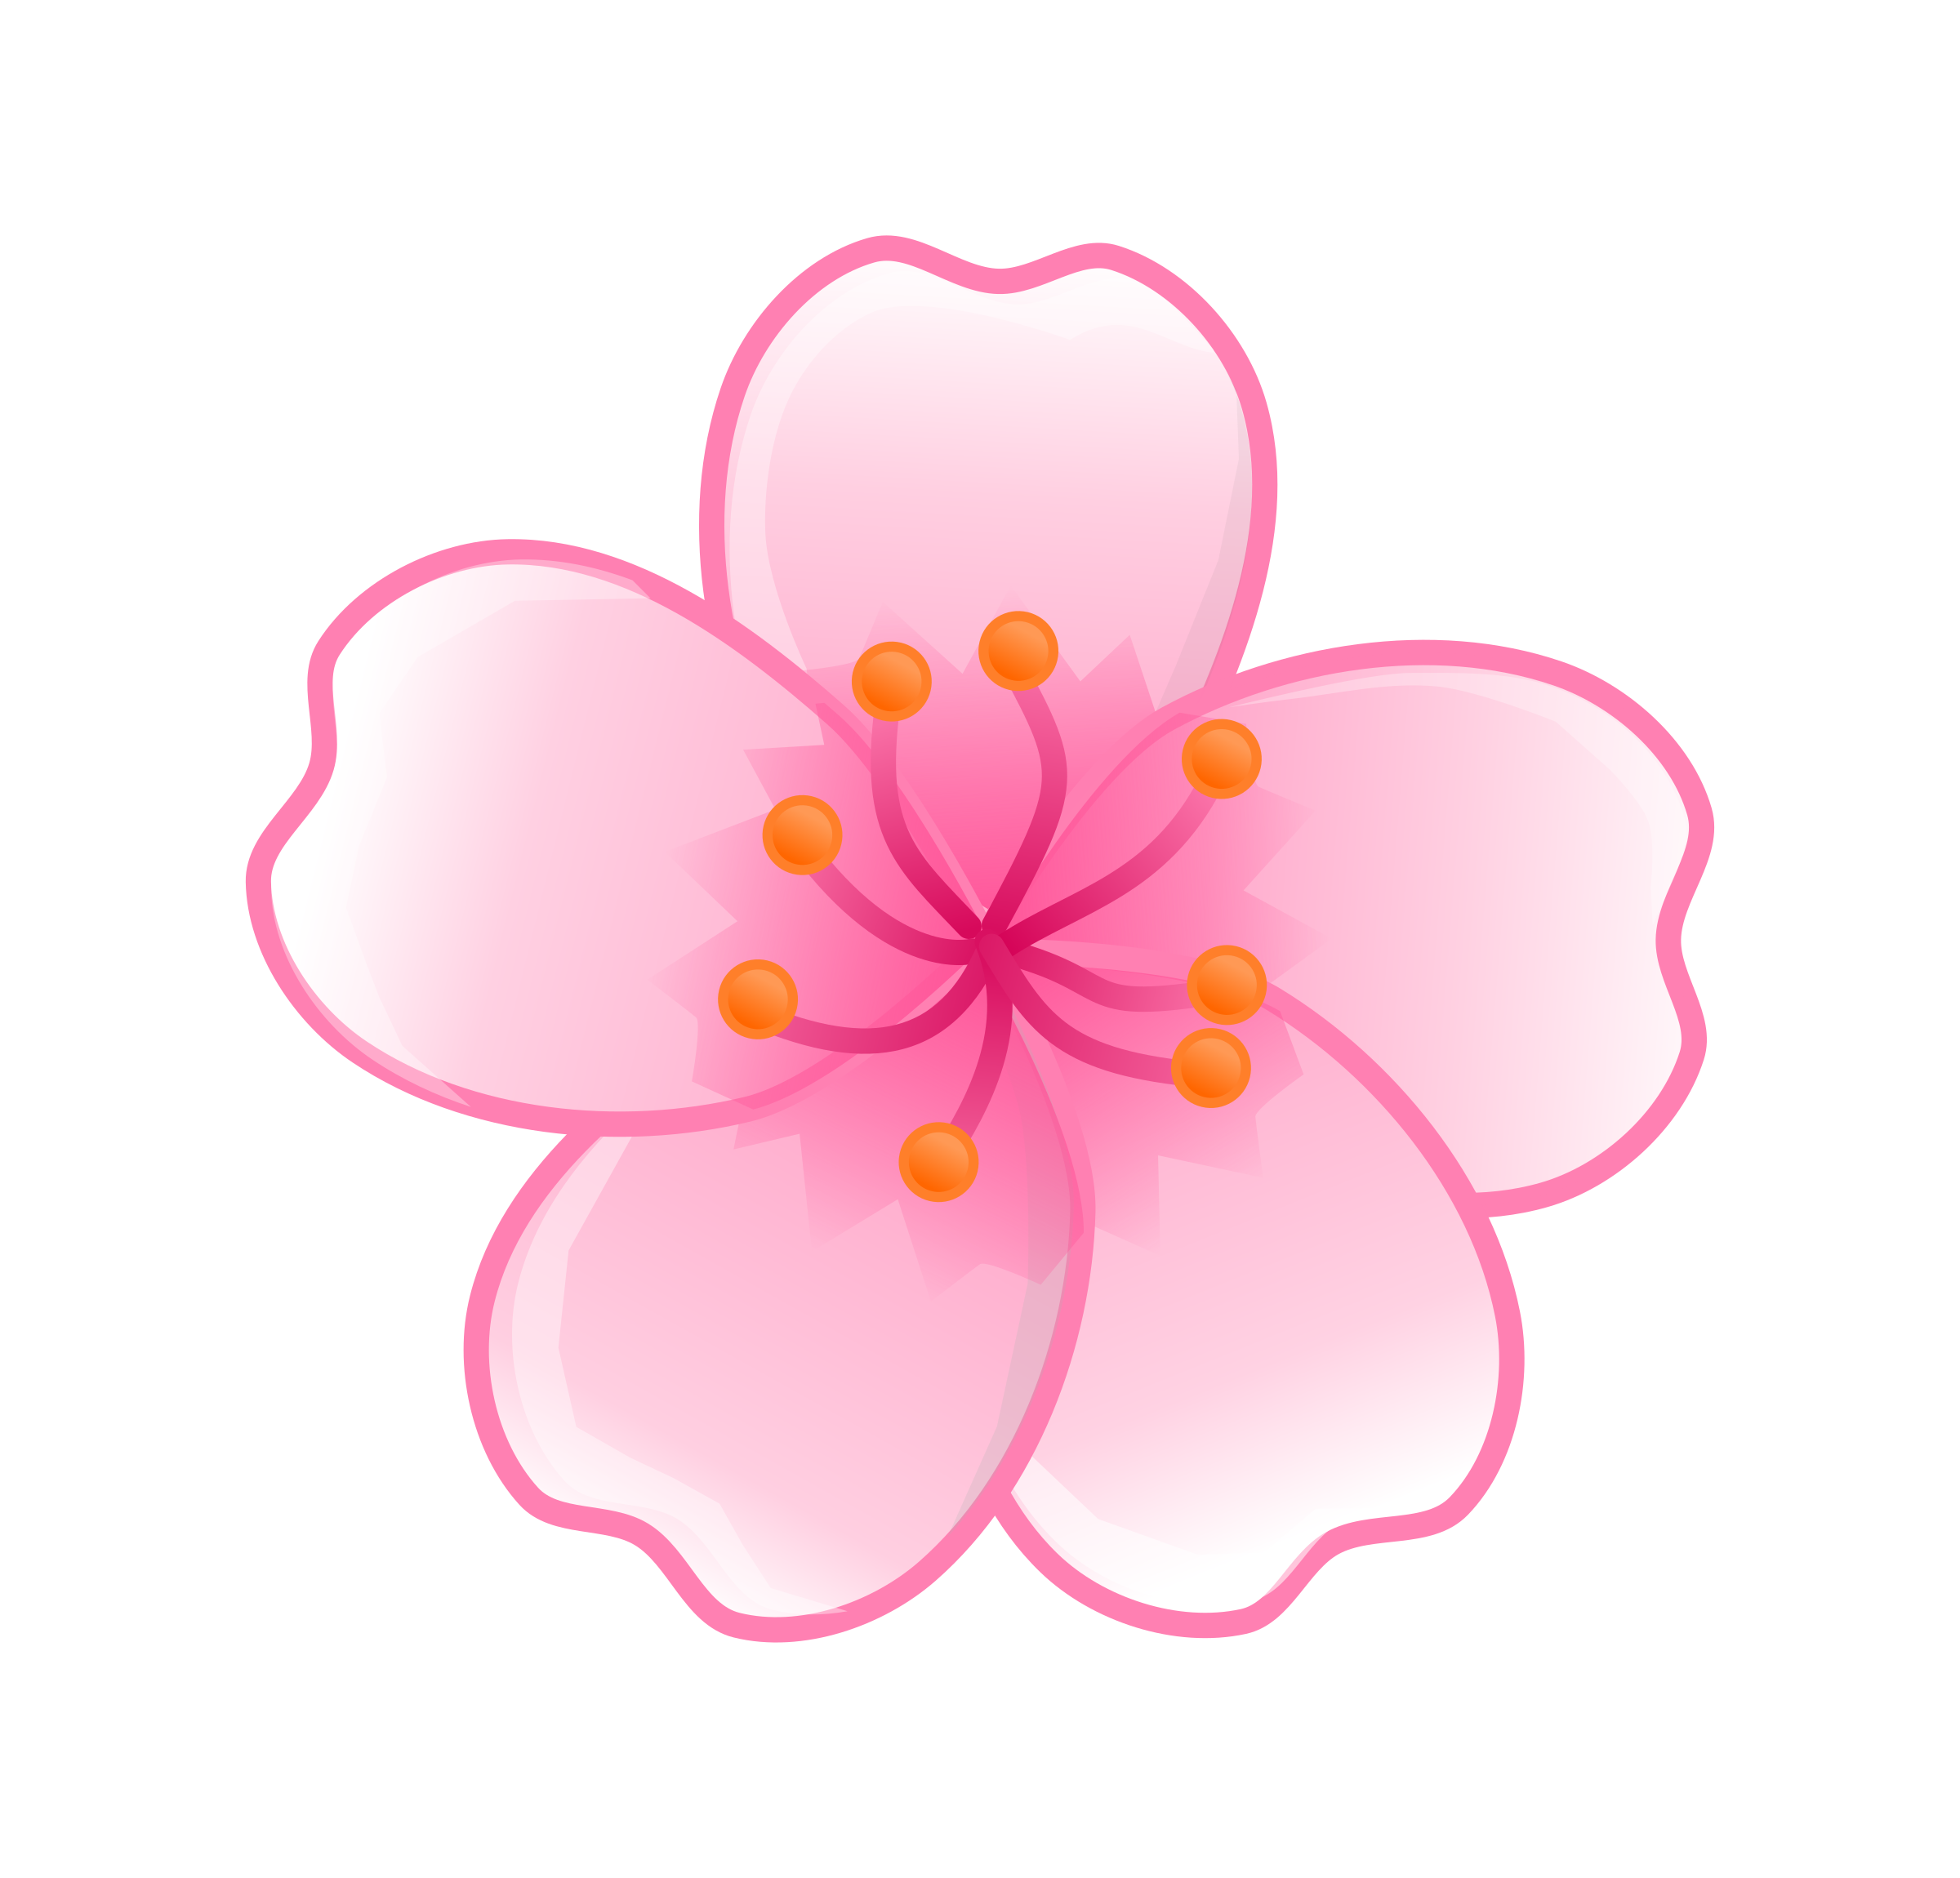 Sakura flower Icons PNG - Free PNG and Icons Downloads